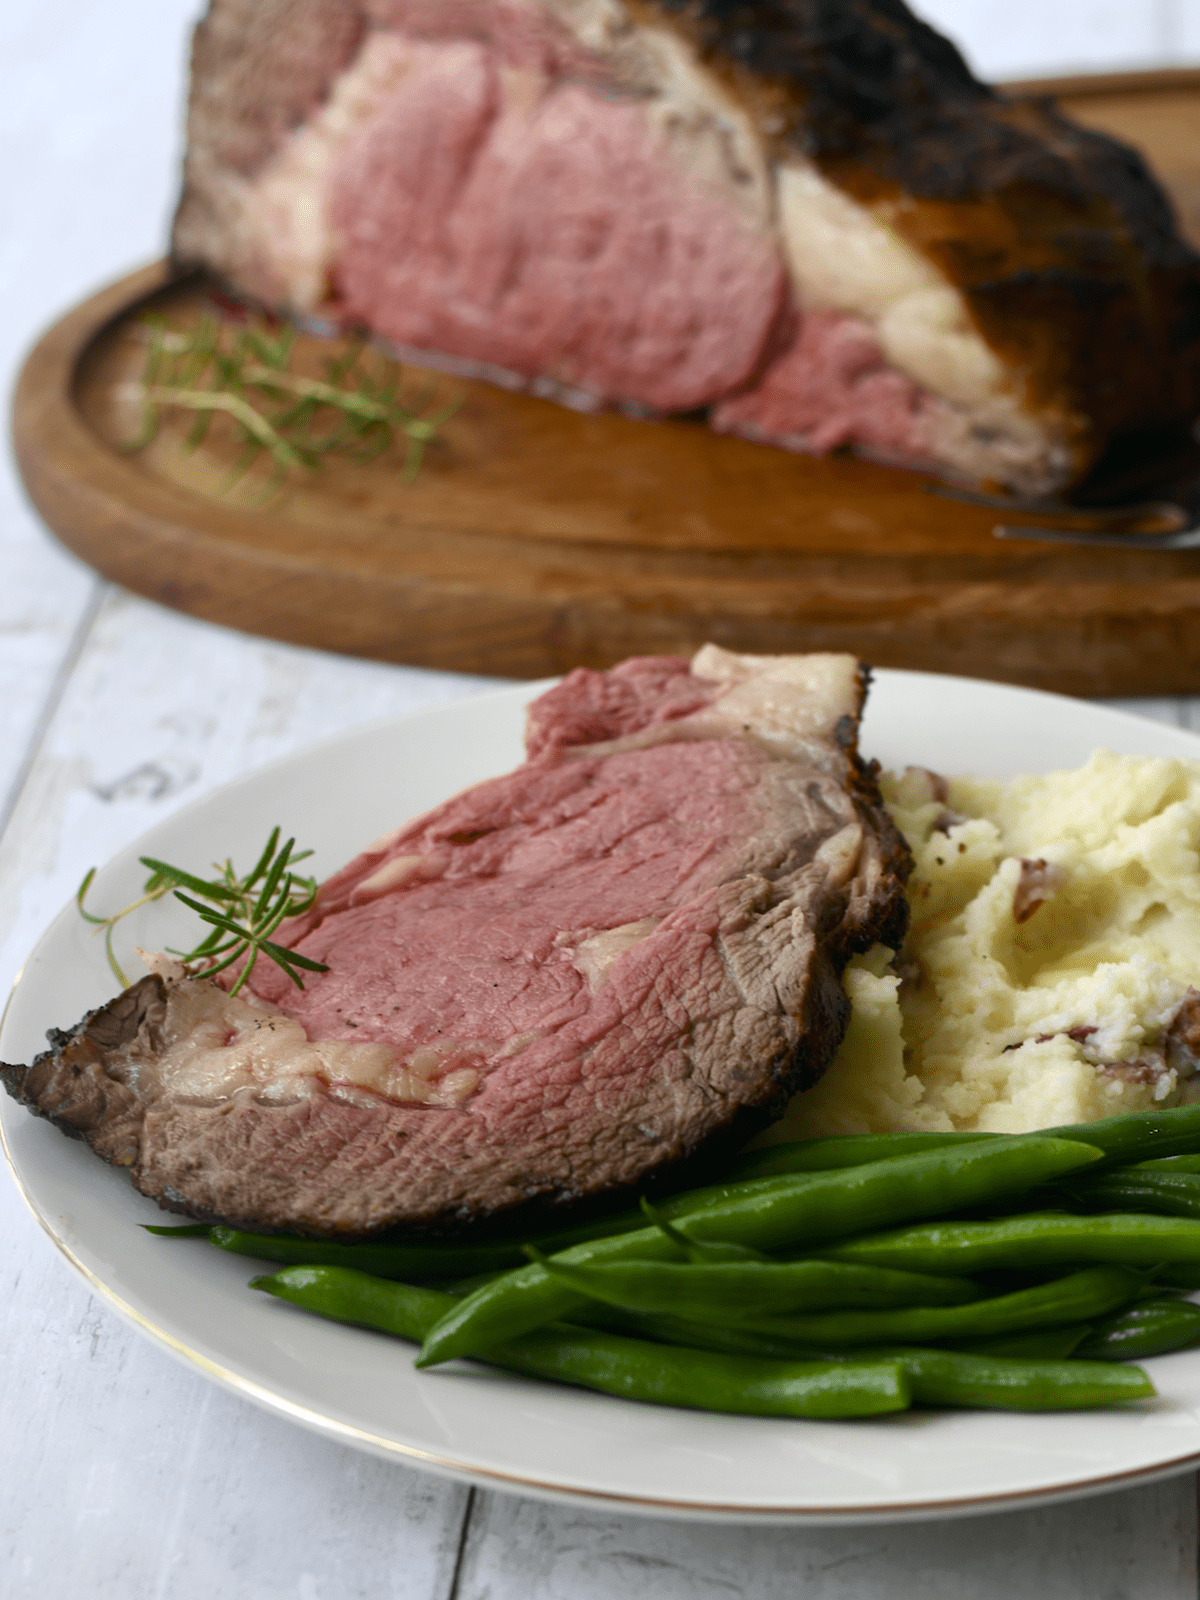 Boneless beef rib eye roast cooked in the background with a slice on a plate with green beans and mashed potatoes.